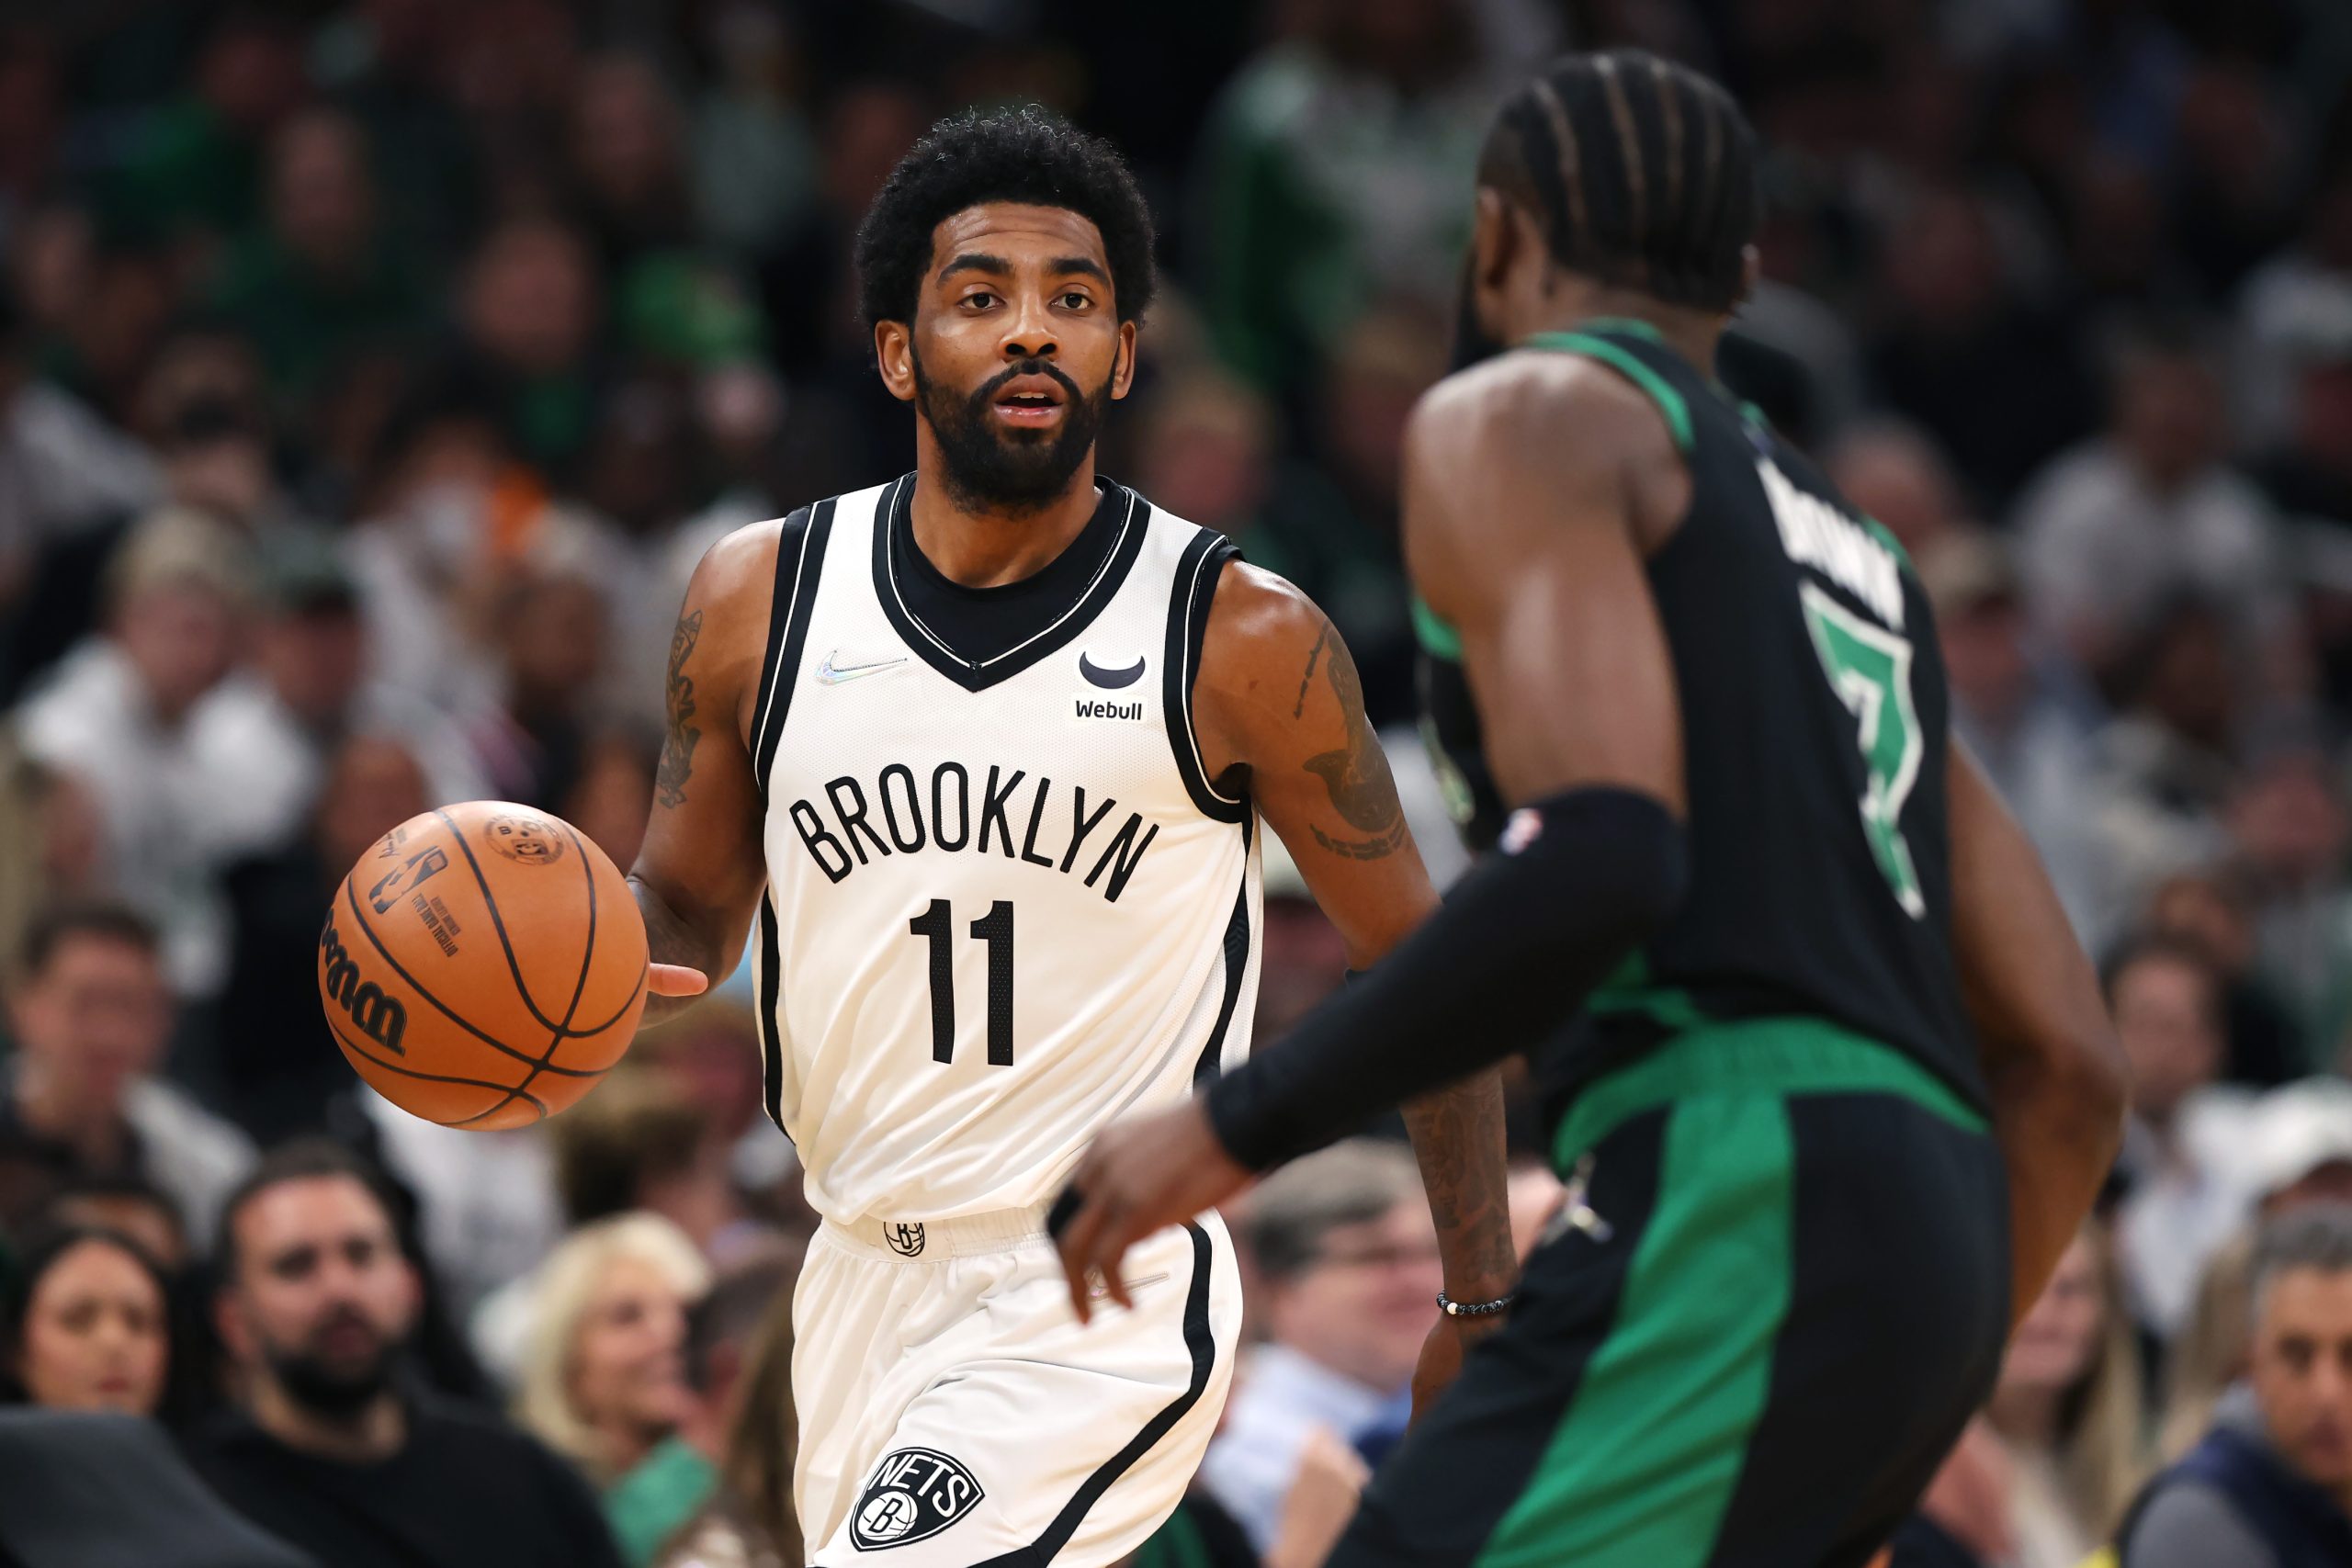 Kyrie Irving of the Brooklyn Nets dribbles against Jaylen Brown of the Boston Celtics.